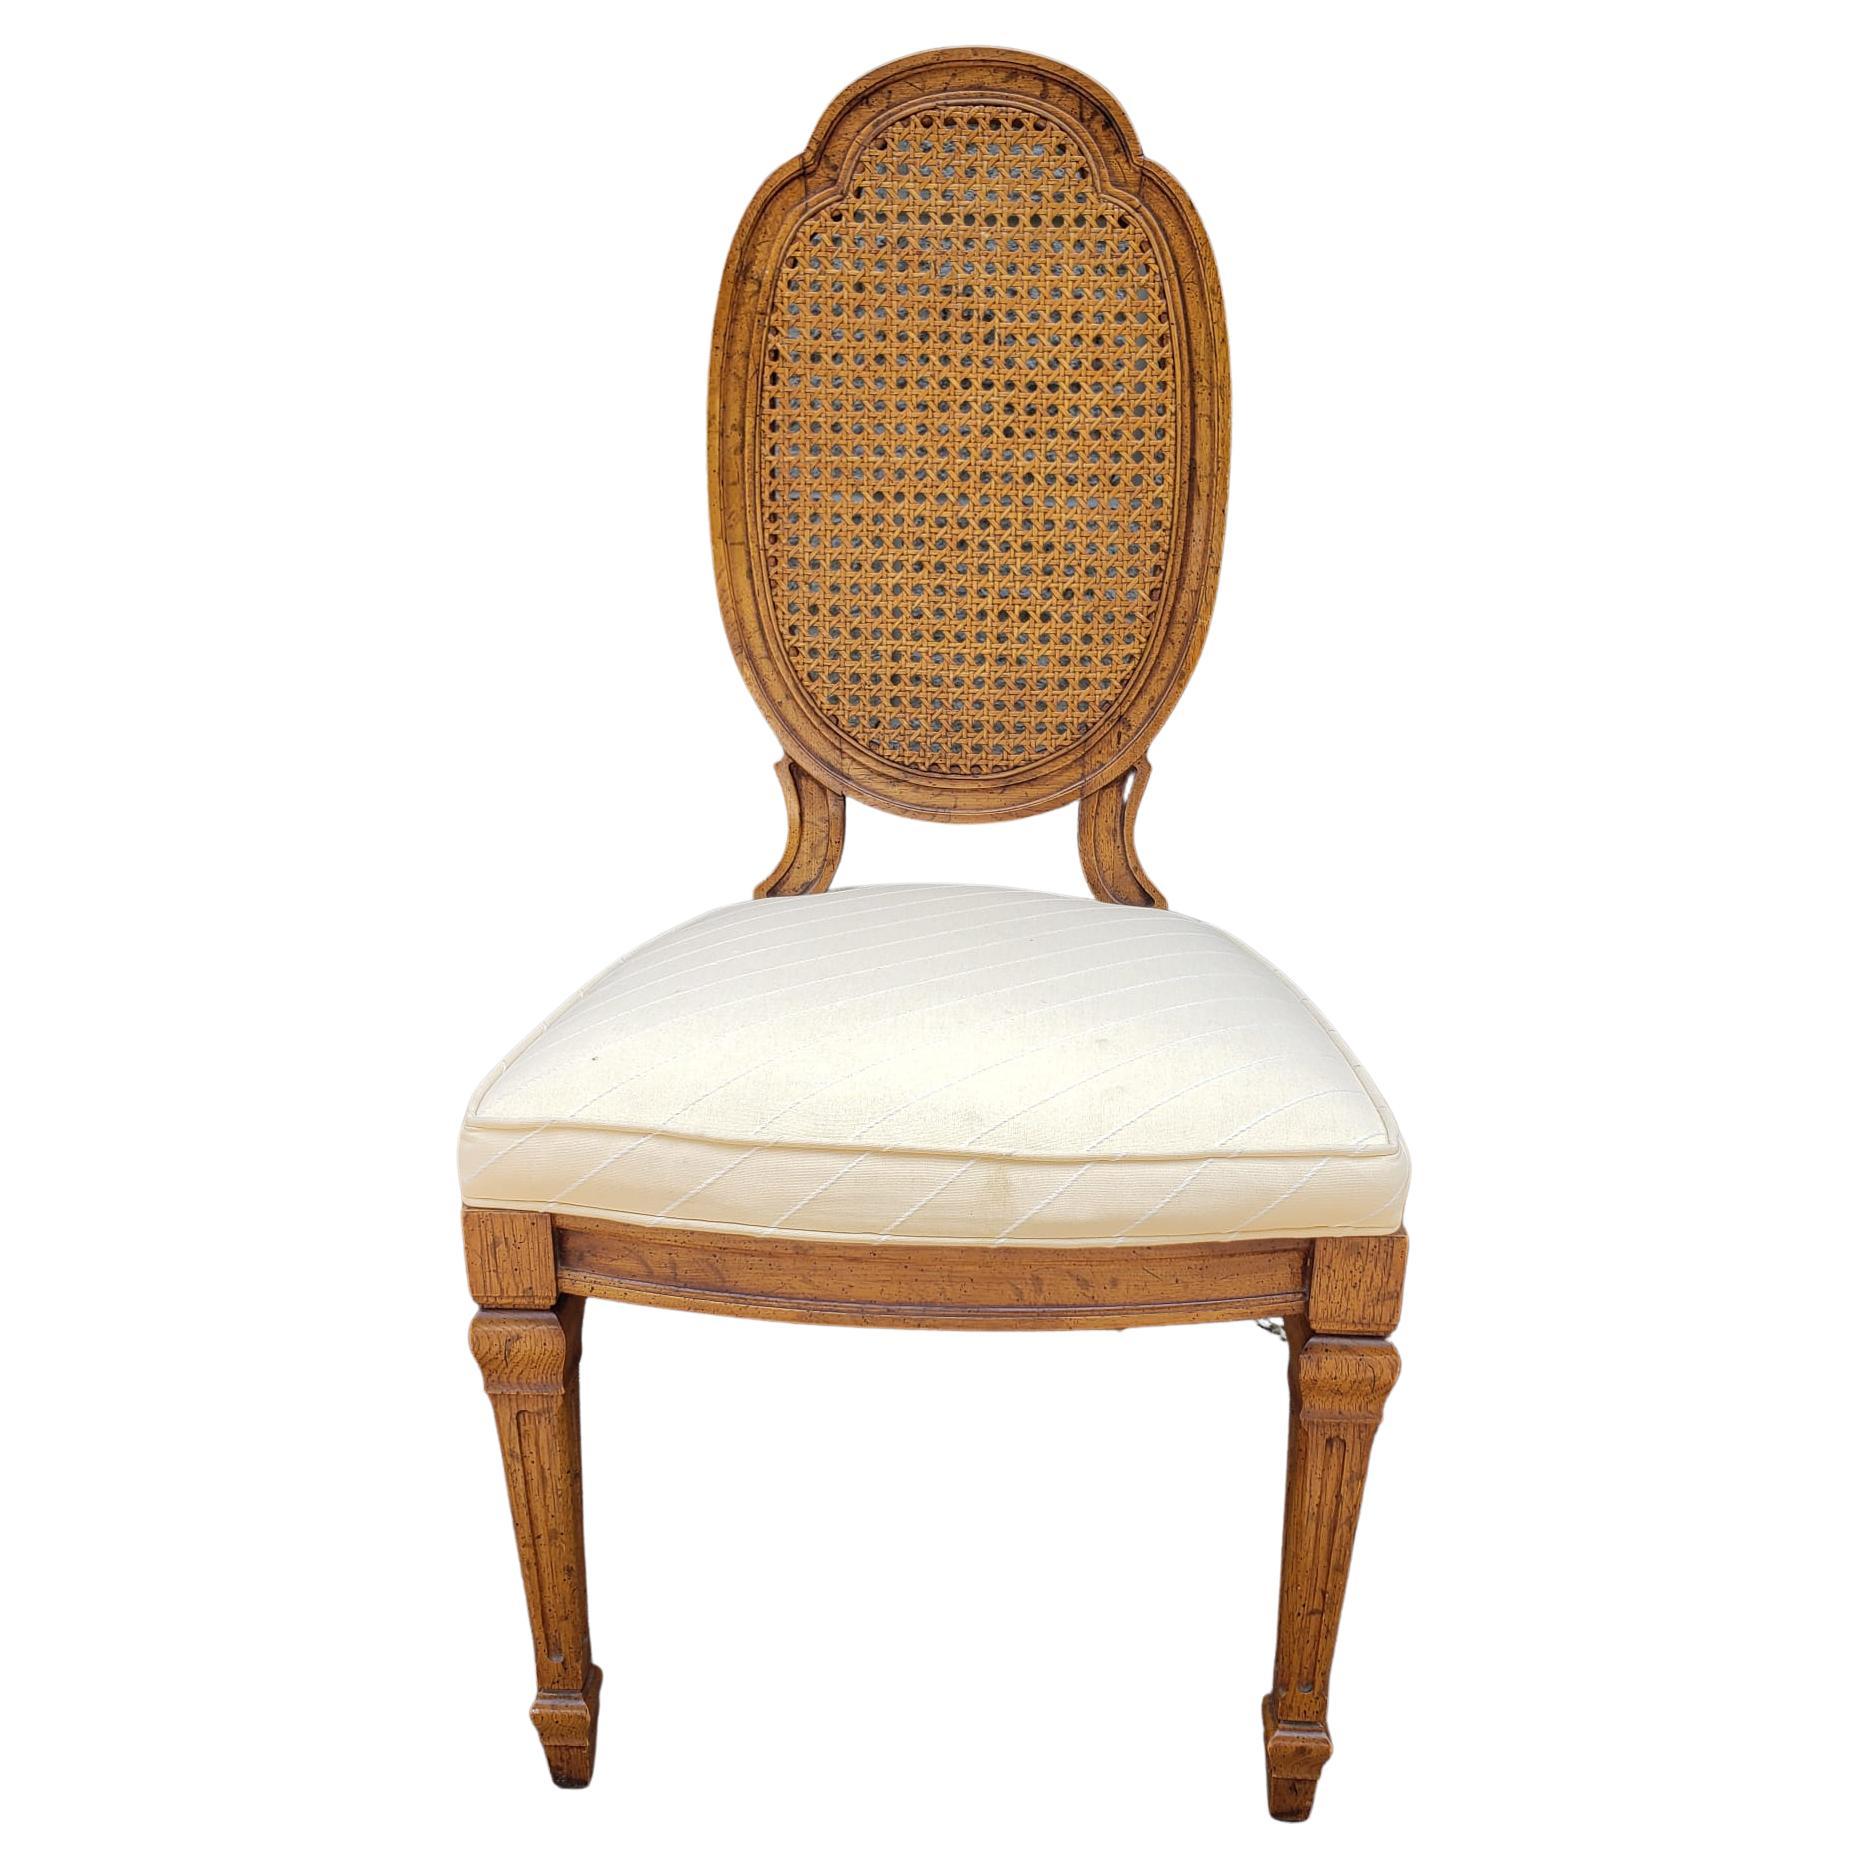 A Mid-Century French Country Walnut , Cane and Upholstered Seat side chair in very good vintage condition. 
Measures 19